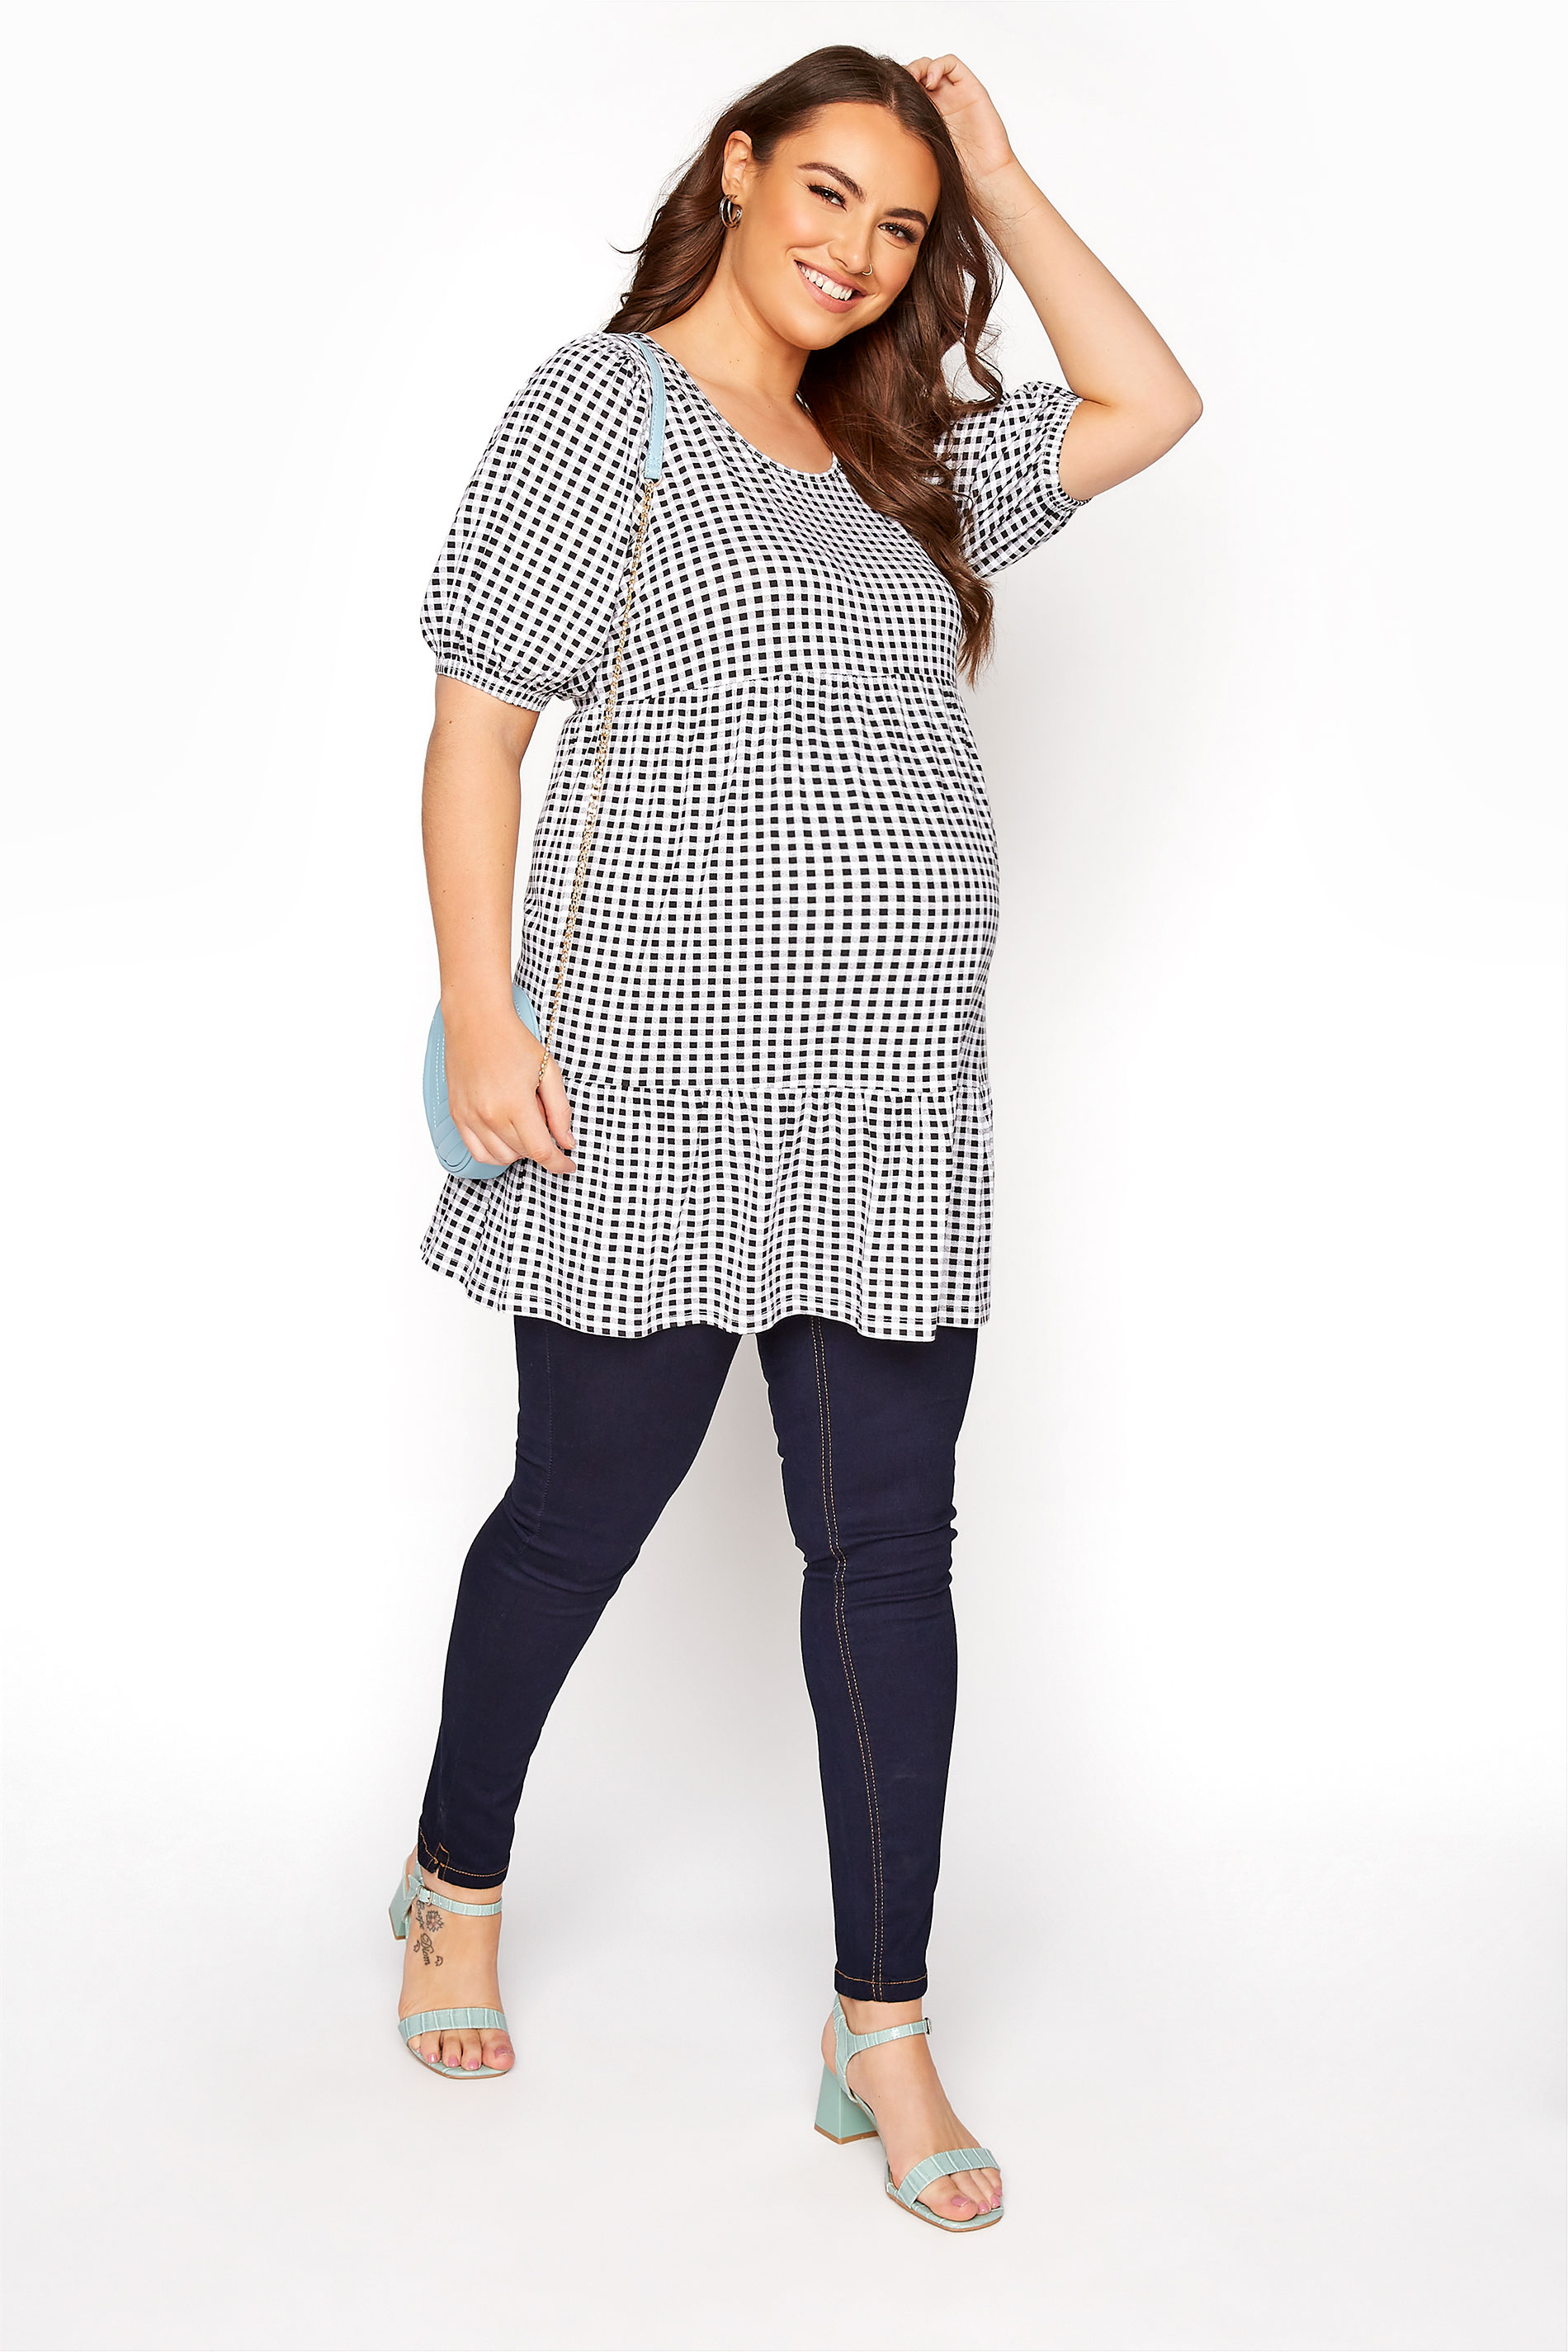 BUMP IT UP MATERNITY Black Gingham Tiered Smock Top